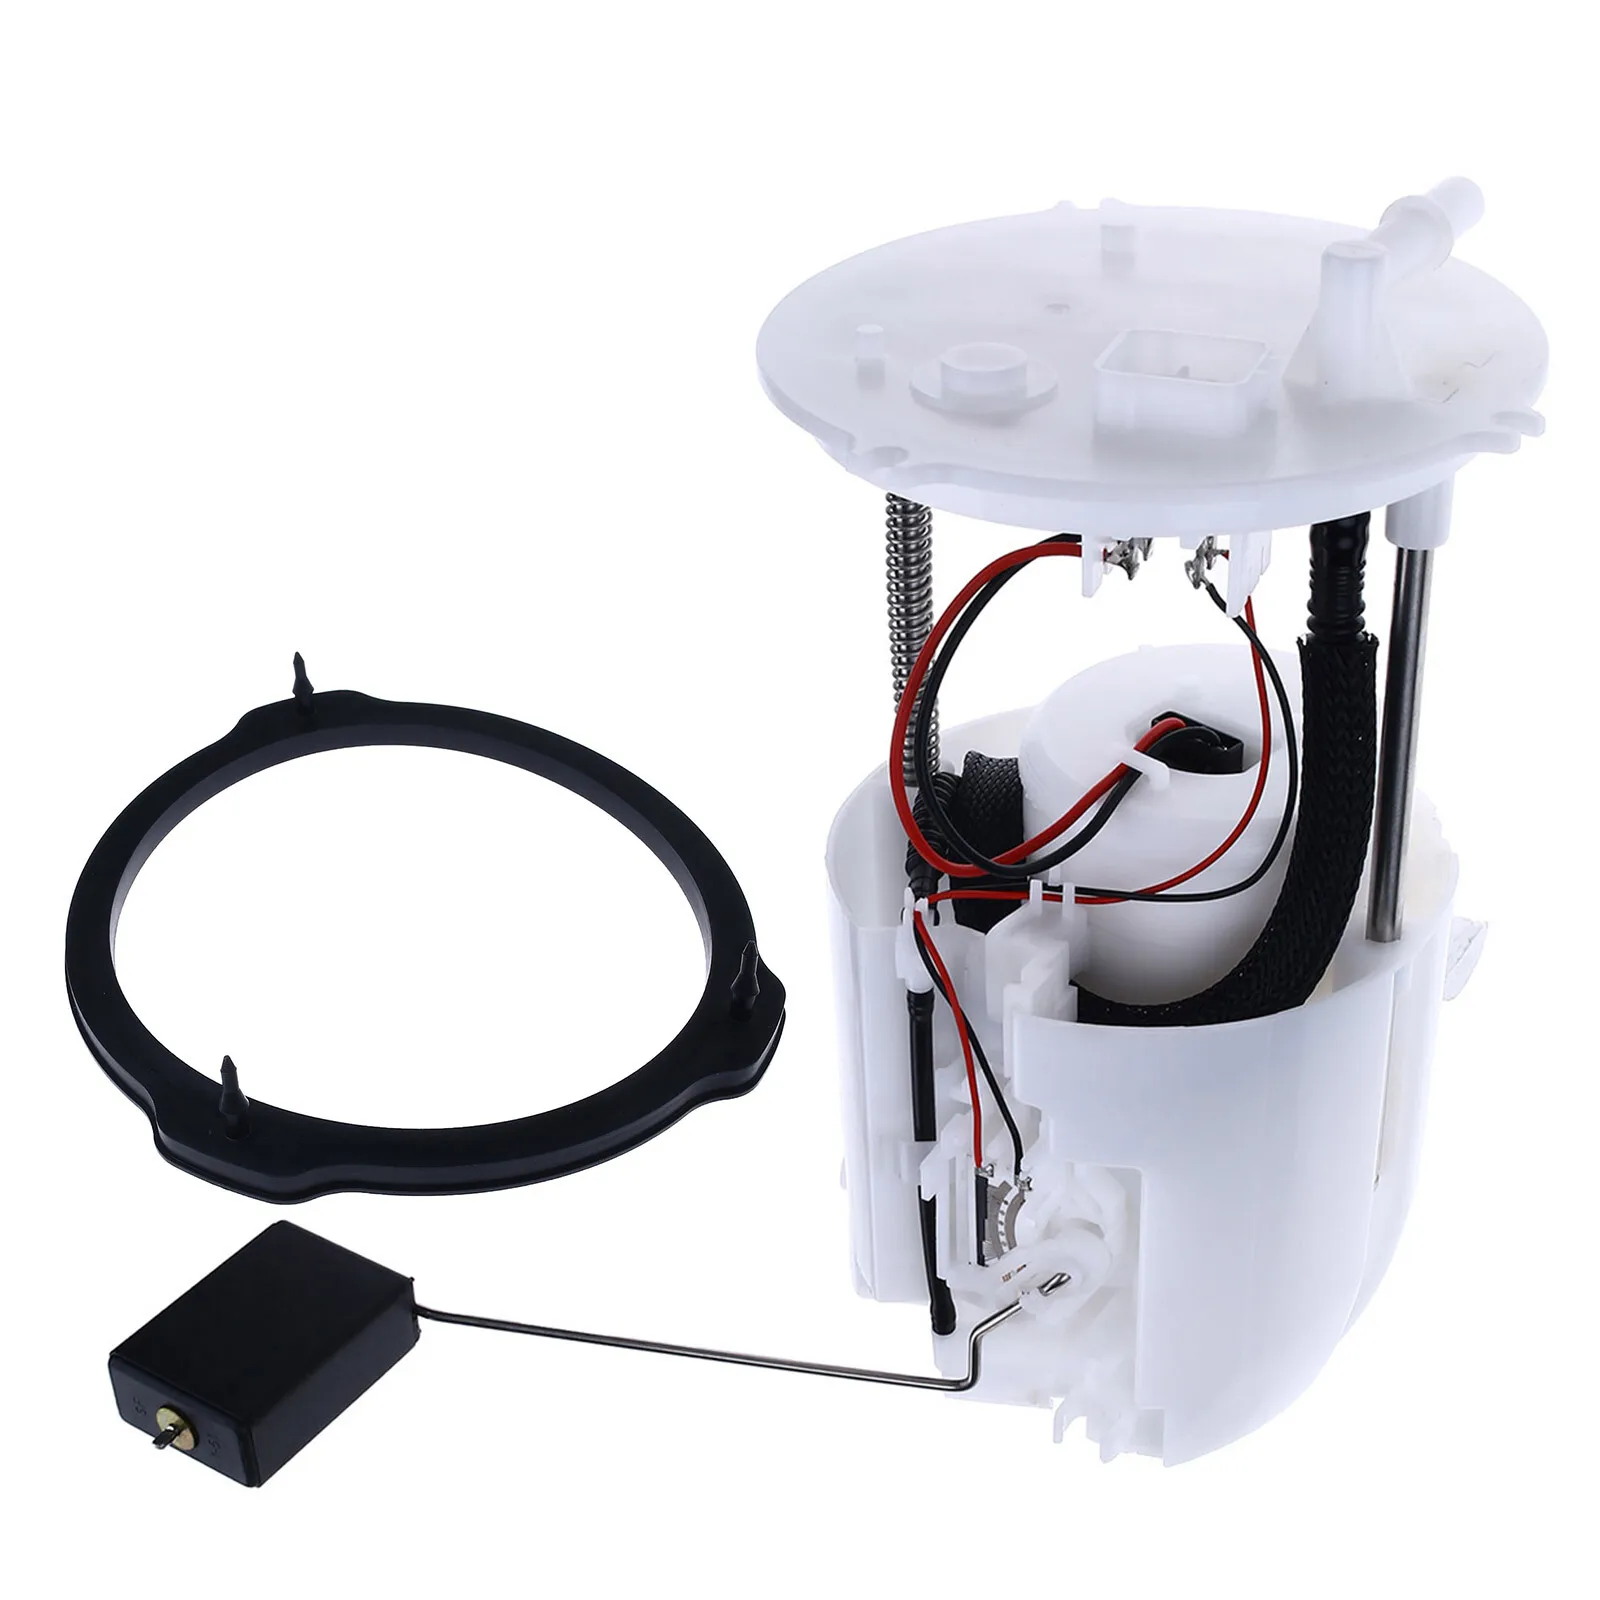 

In-stock CN US Fuel Pump Module Assembly with Sending Unit for Mazda 5 06-10 12-15 L4 2.3L 2.5L LFB61335ZB